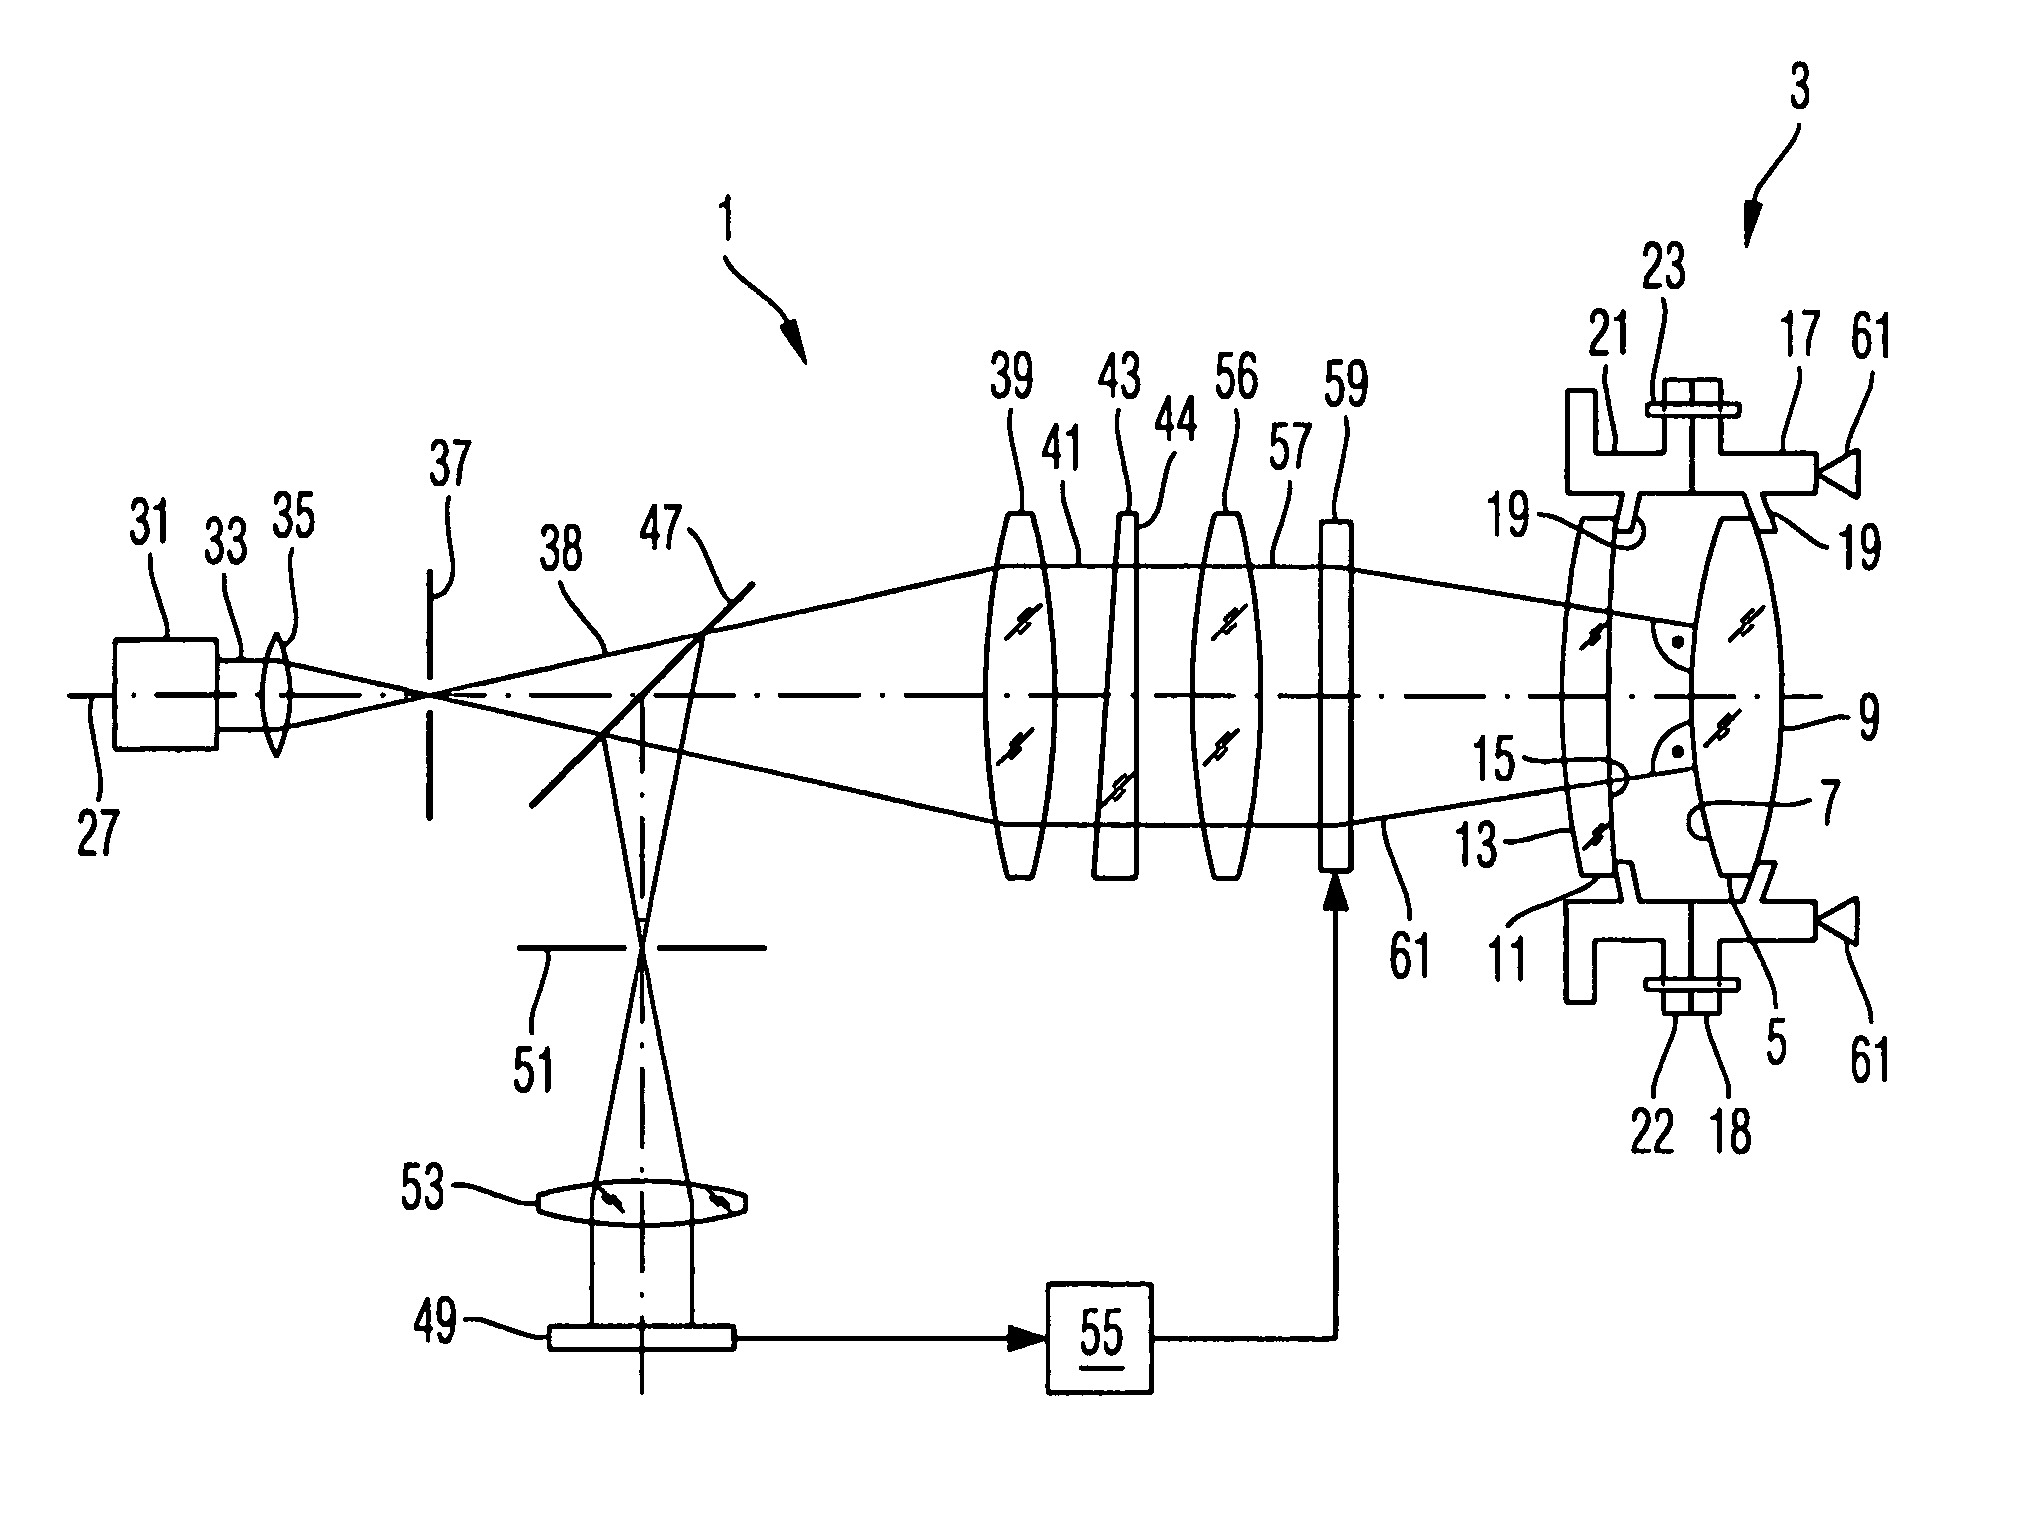 Method of aligning an optical system